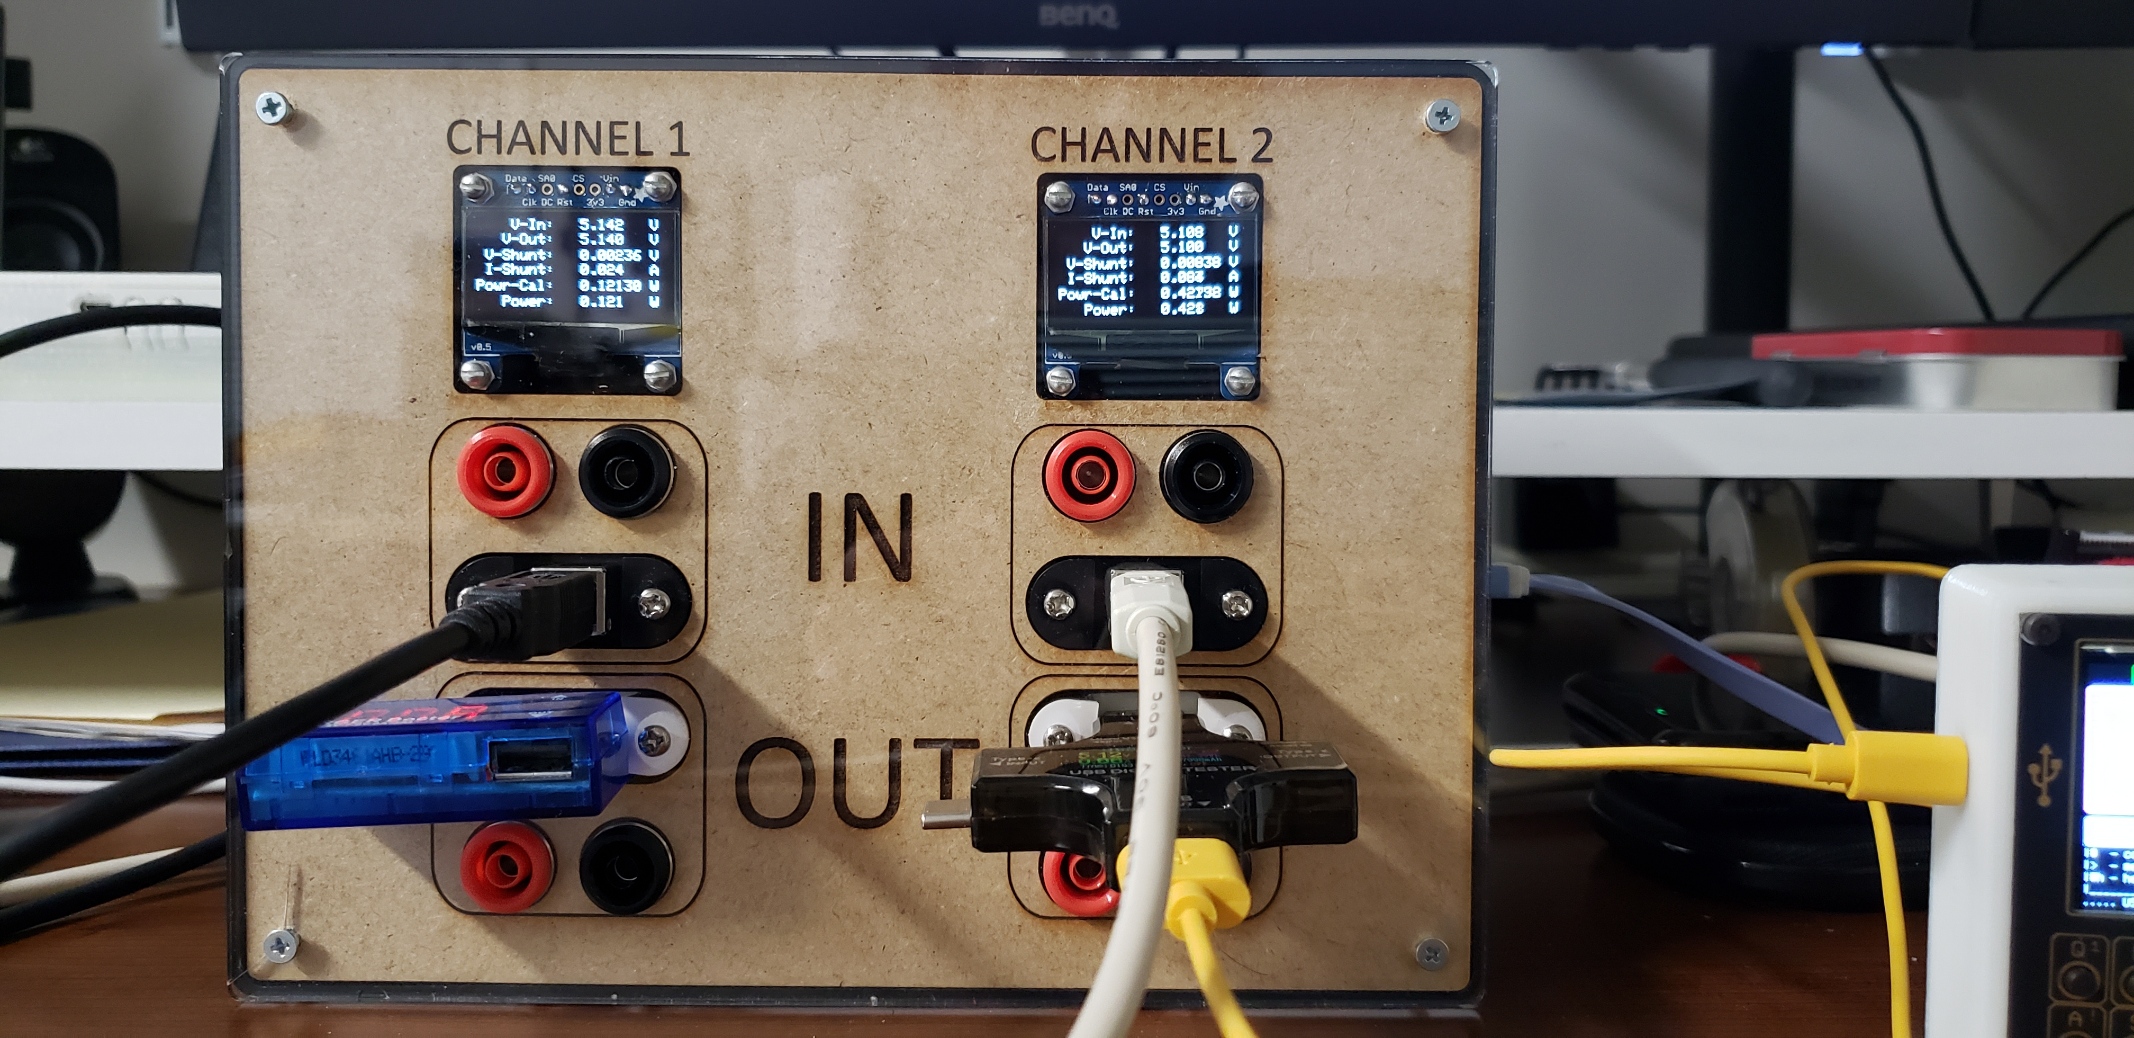 Dual Volt Amp Monitor device measuring two circuits.